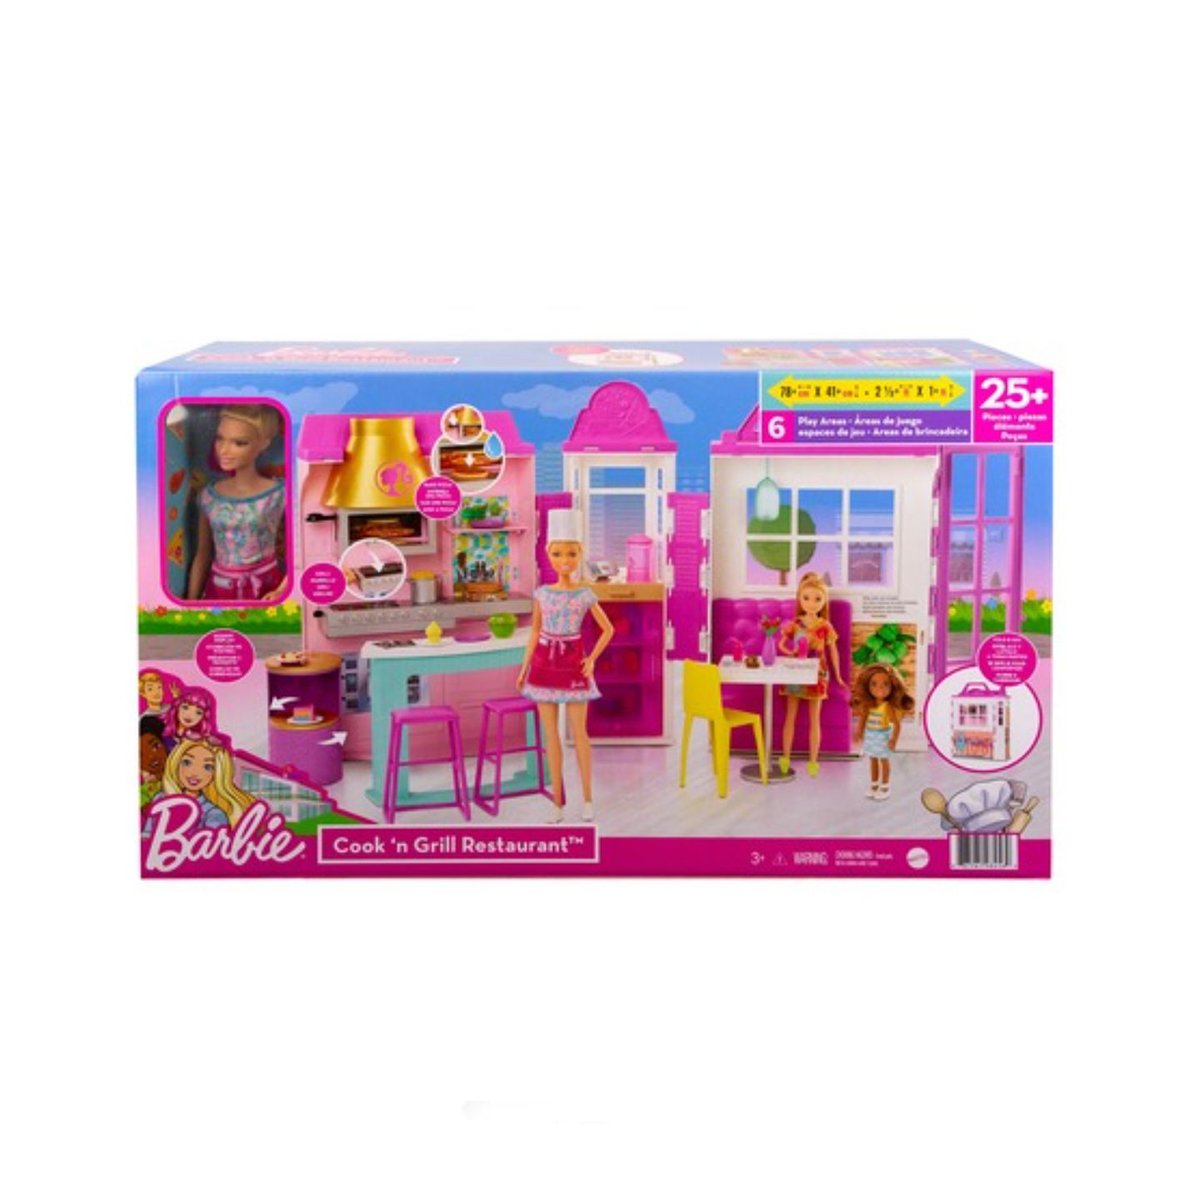 Set restaurant, Barbie, Cook and Grill and